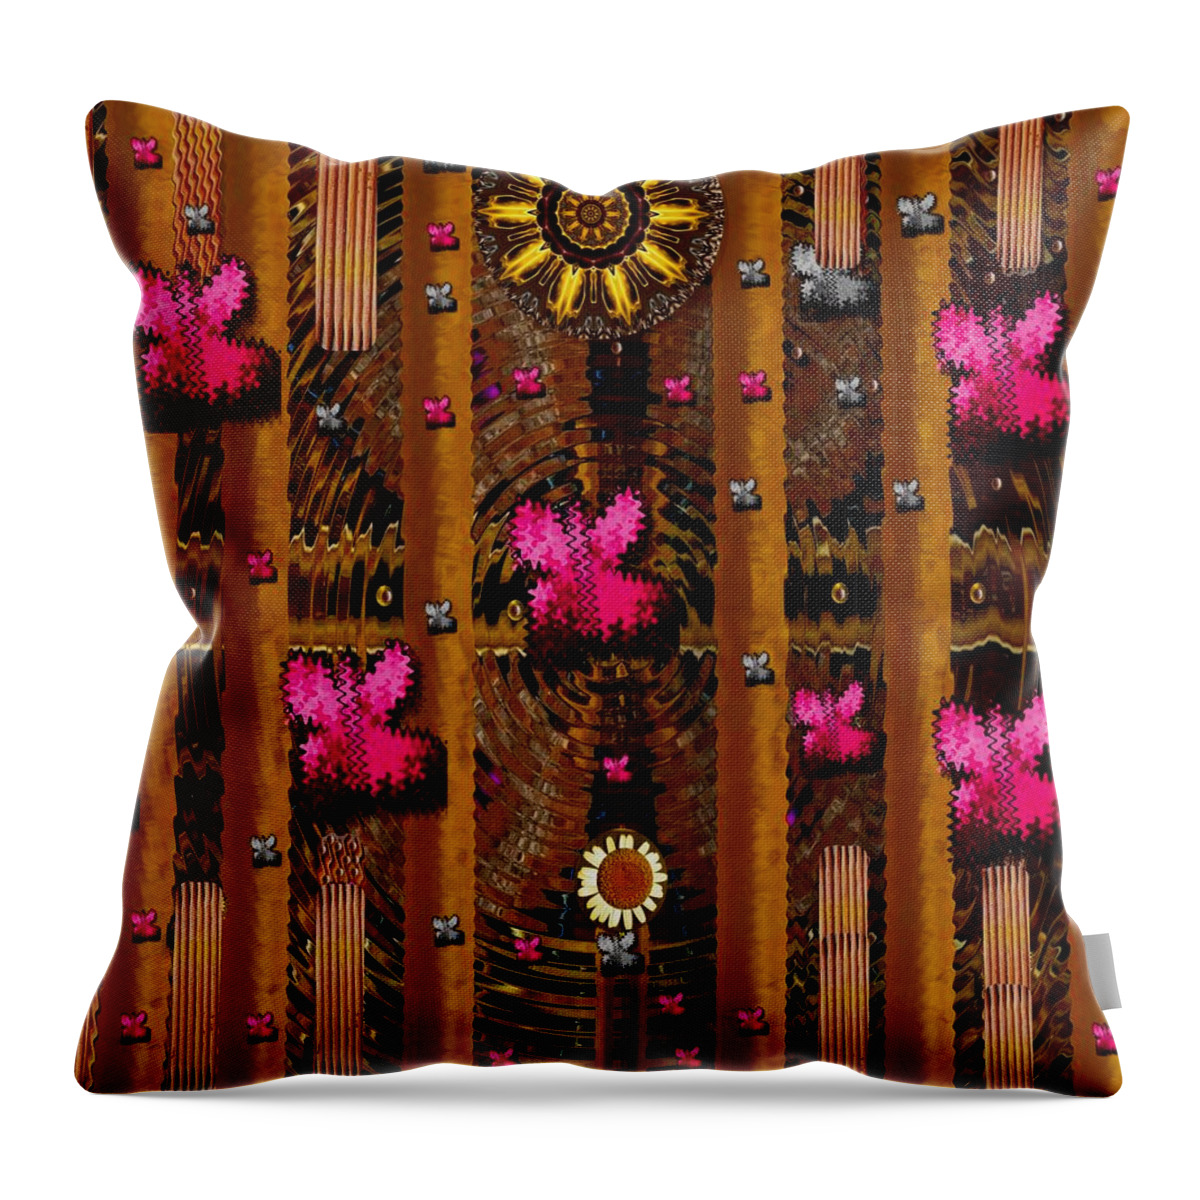 Landscape Throw Pillow featuring the mixed media Sun rose garden by Pepita Selles